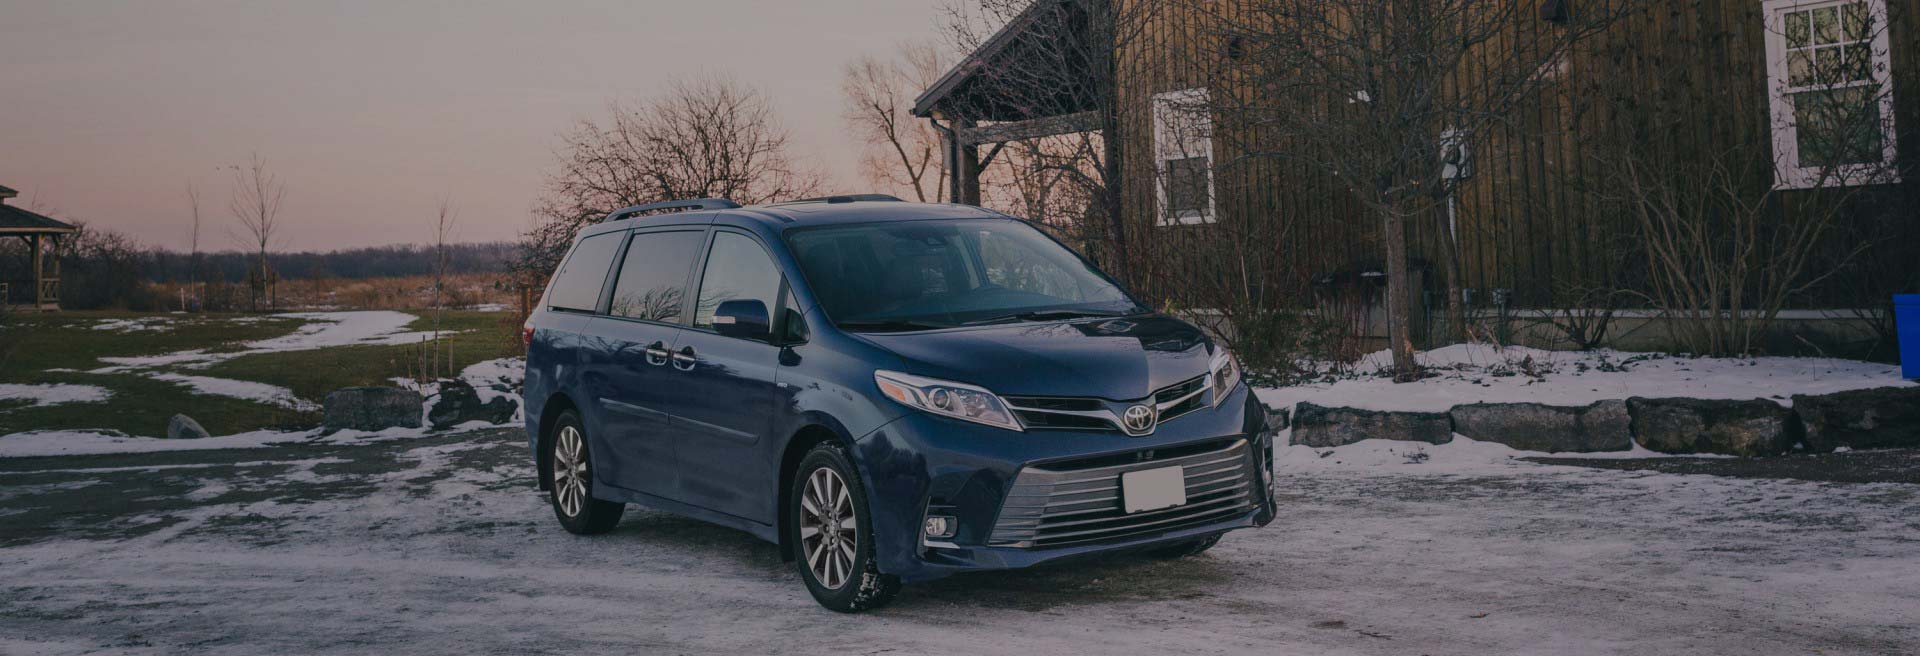 Picture of a new Toyota Sienna